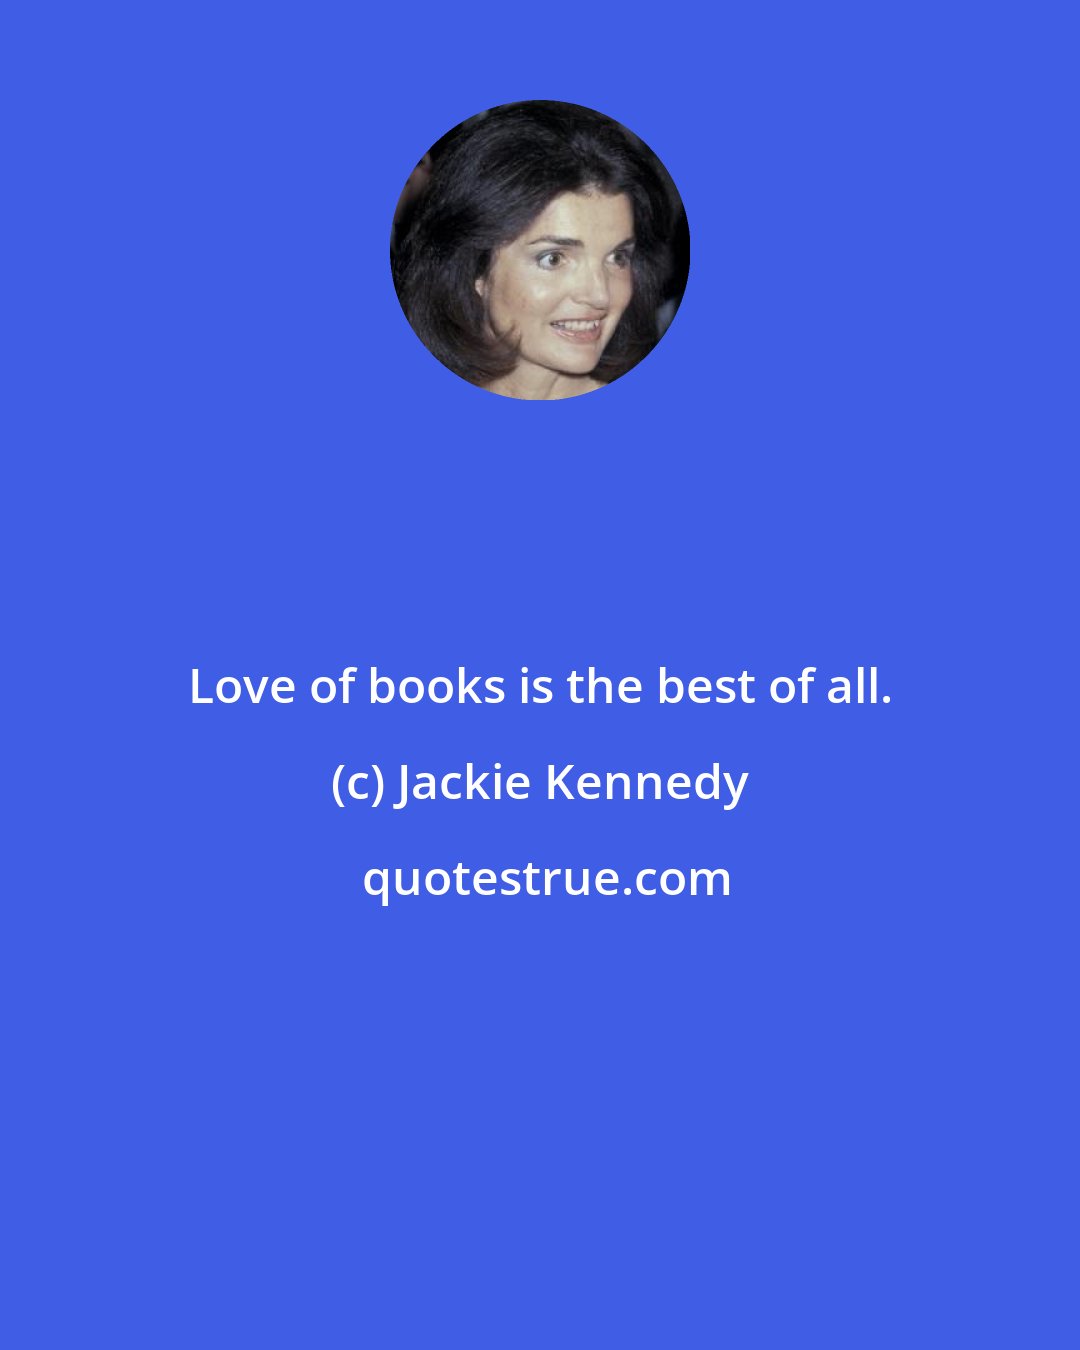 Jackie Kennedy: Love of books is the best of all.